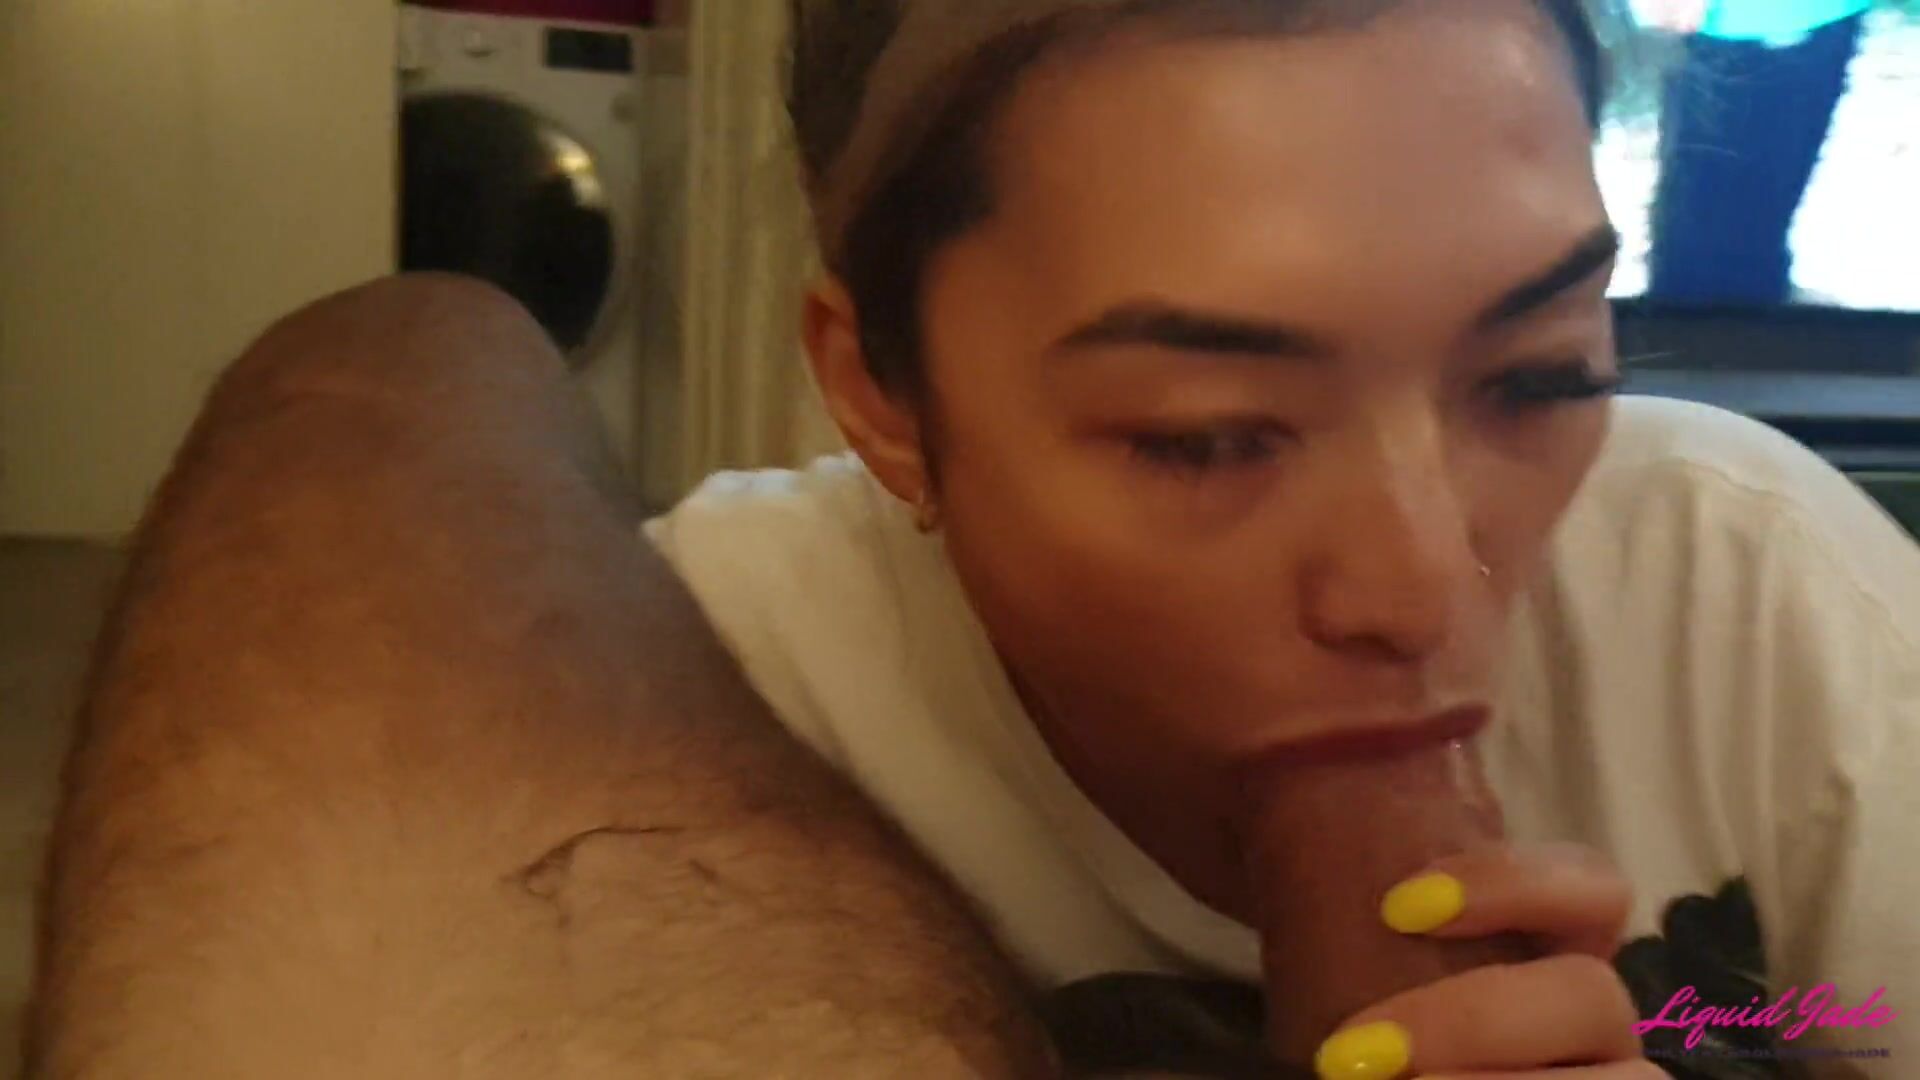 LiquidJade Blonde Asian Sucking Daddys Big White Cock + Swallowing His Thick Load